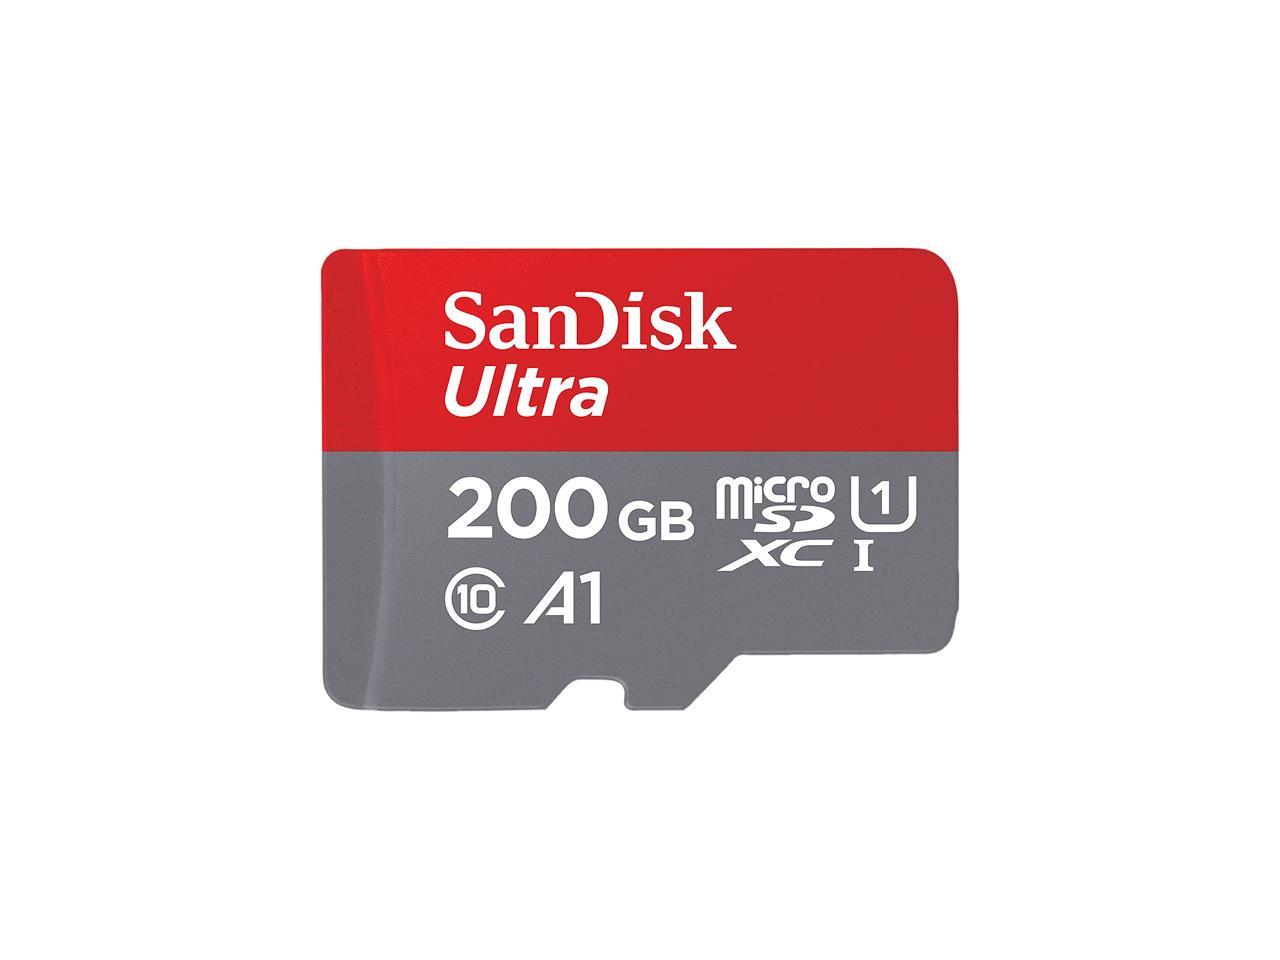 SanDisk Ultra 200GB MicroSDXC Verified for Sony E5353 by SanFlash 100MBs A1 U1 C10 Works with SanDisk 